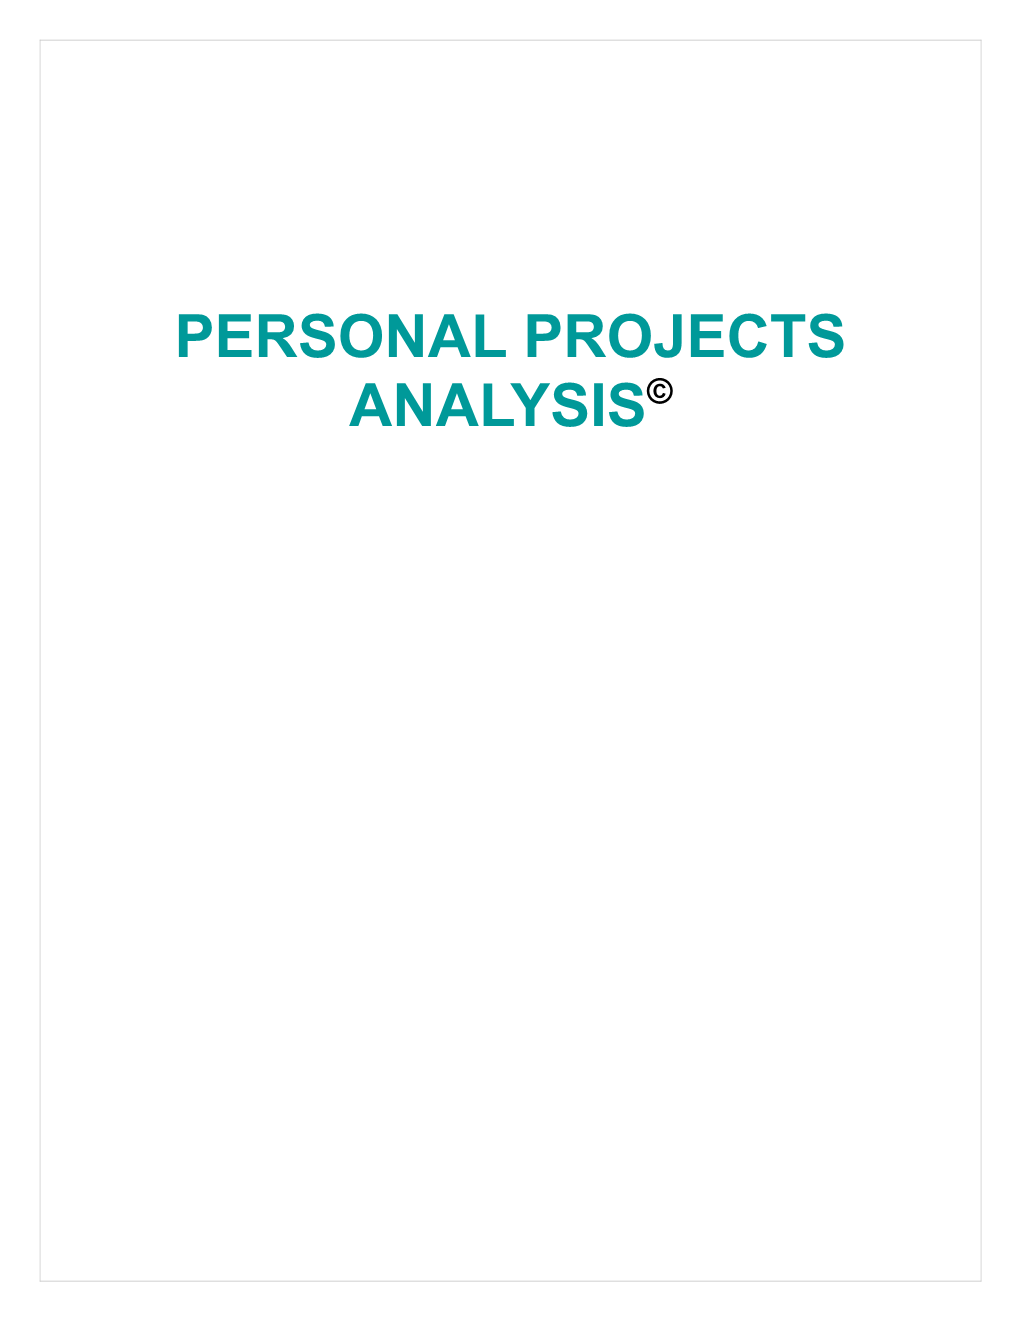 Personal Projects Analysis